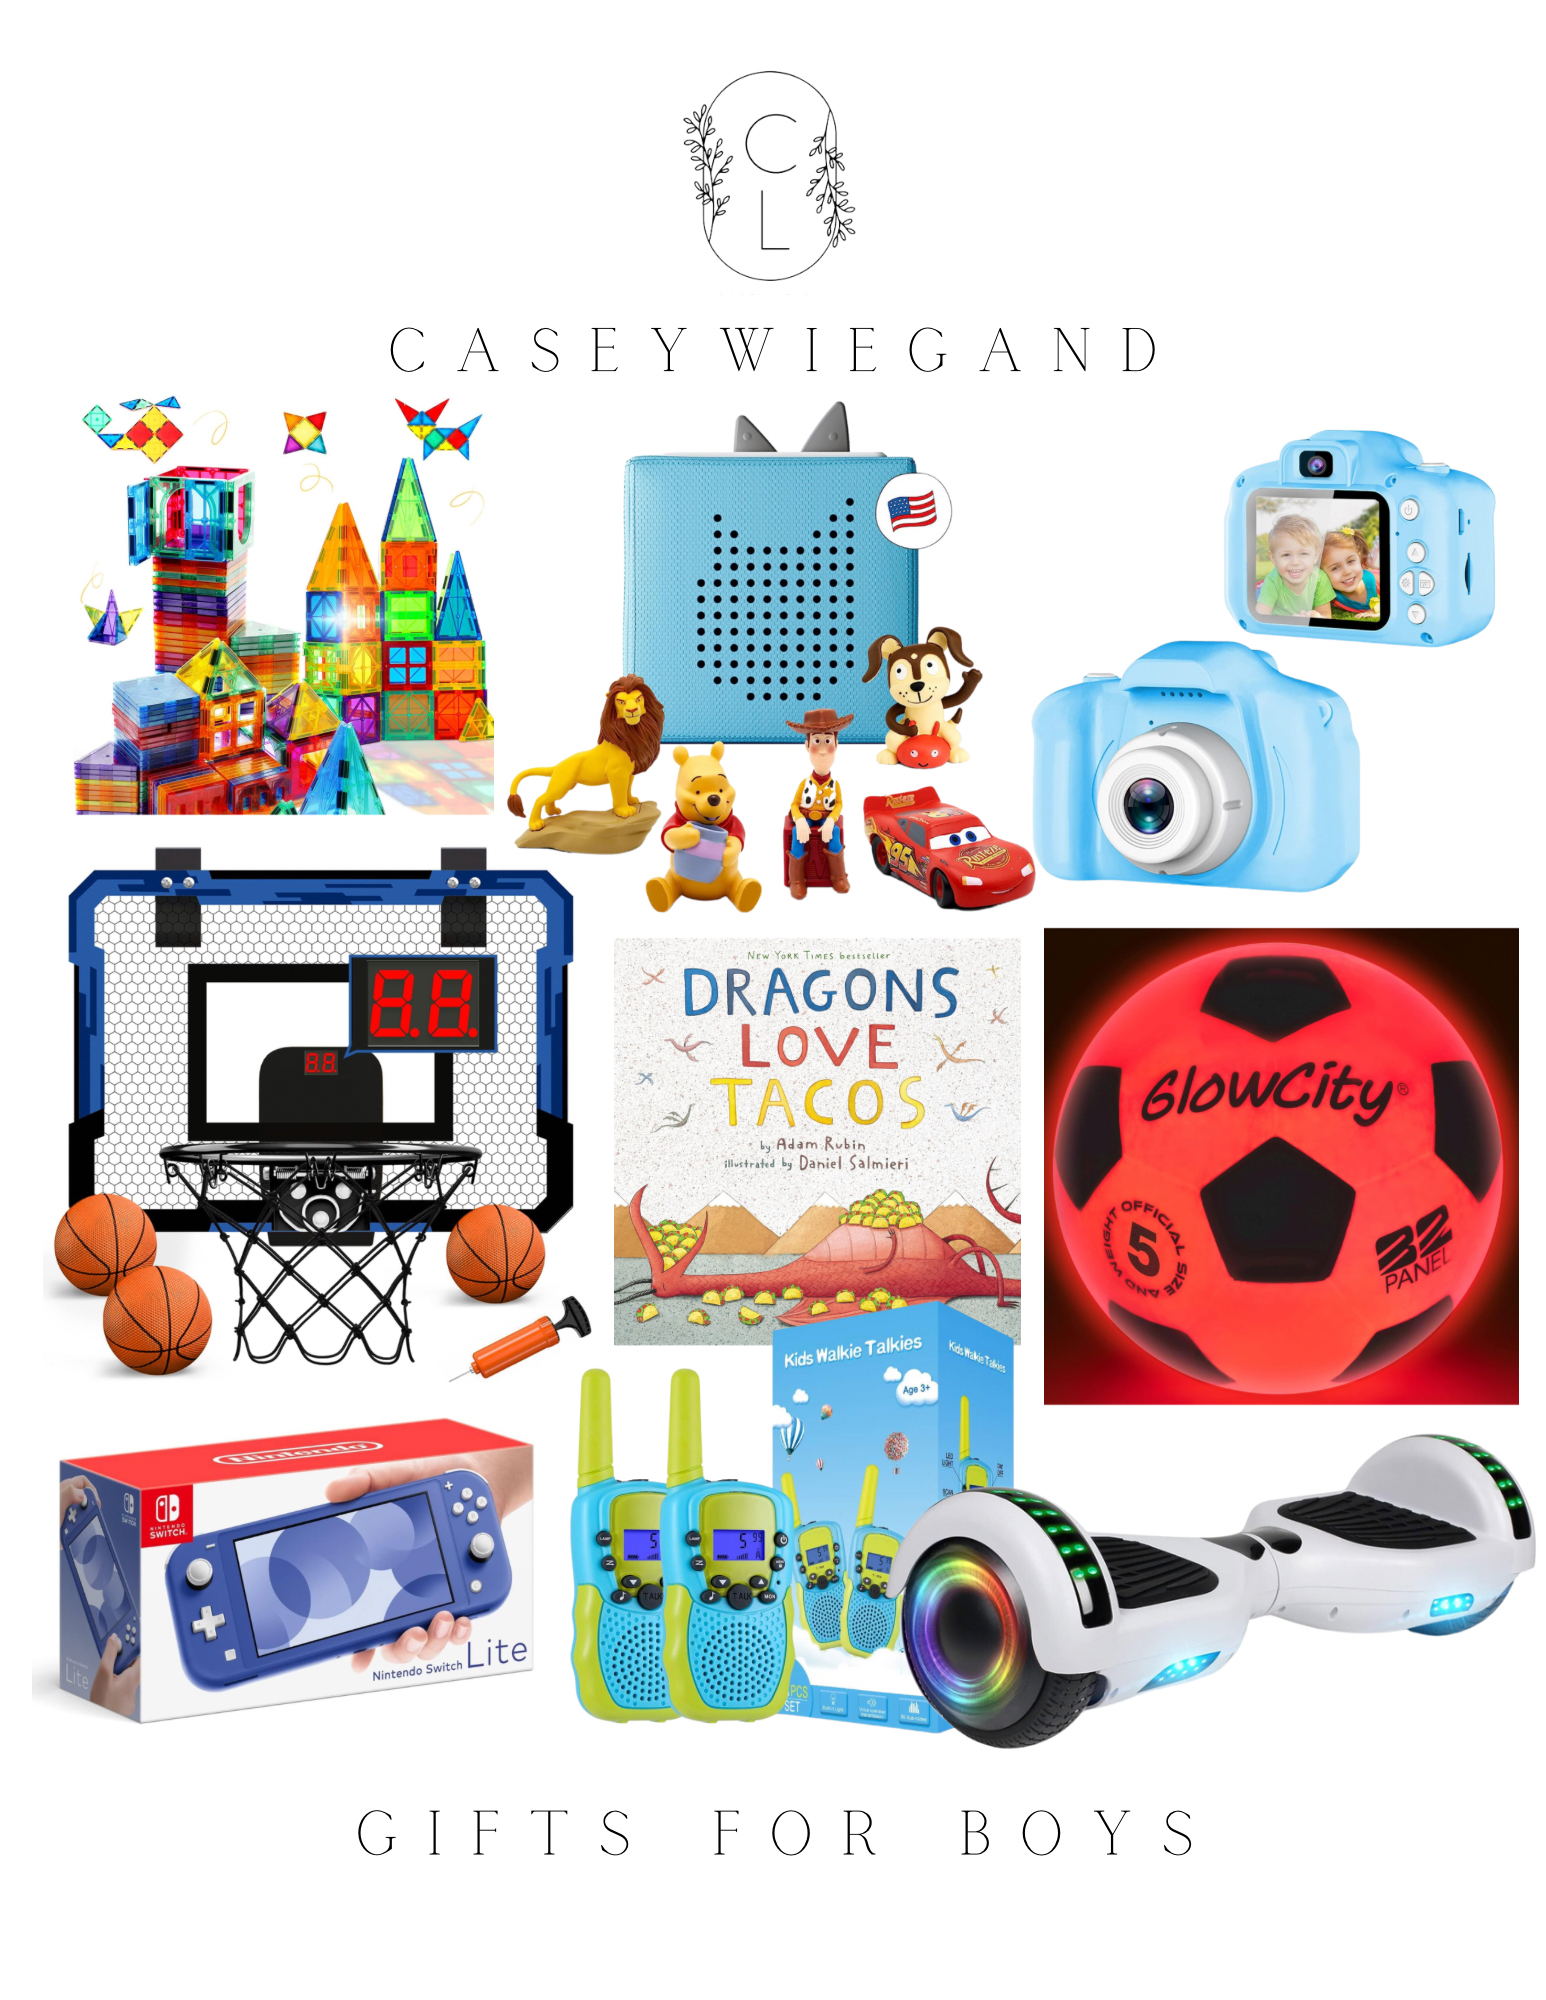 Best Gifts for Kids 2023: Gift Ideas for Kids